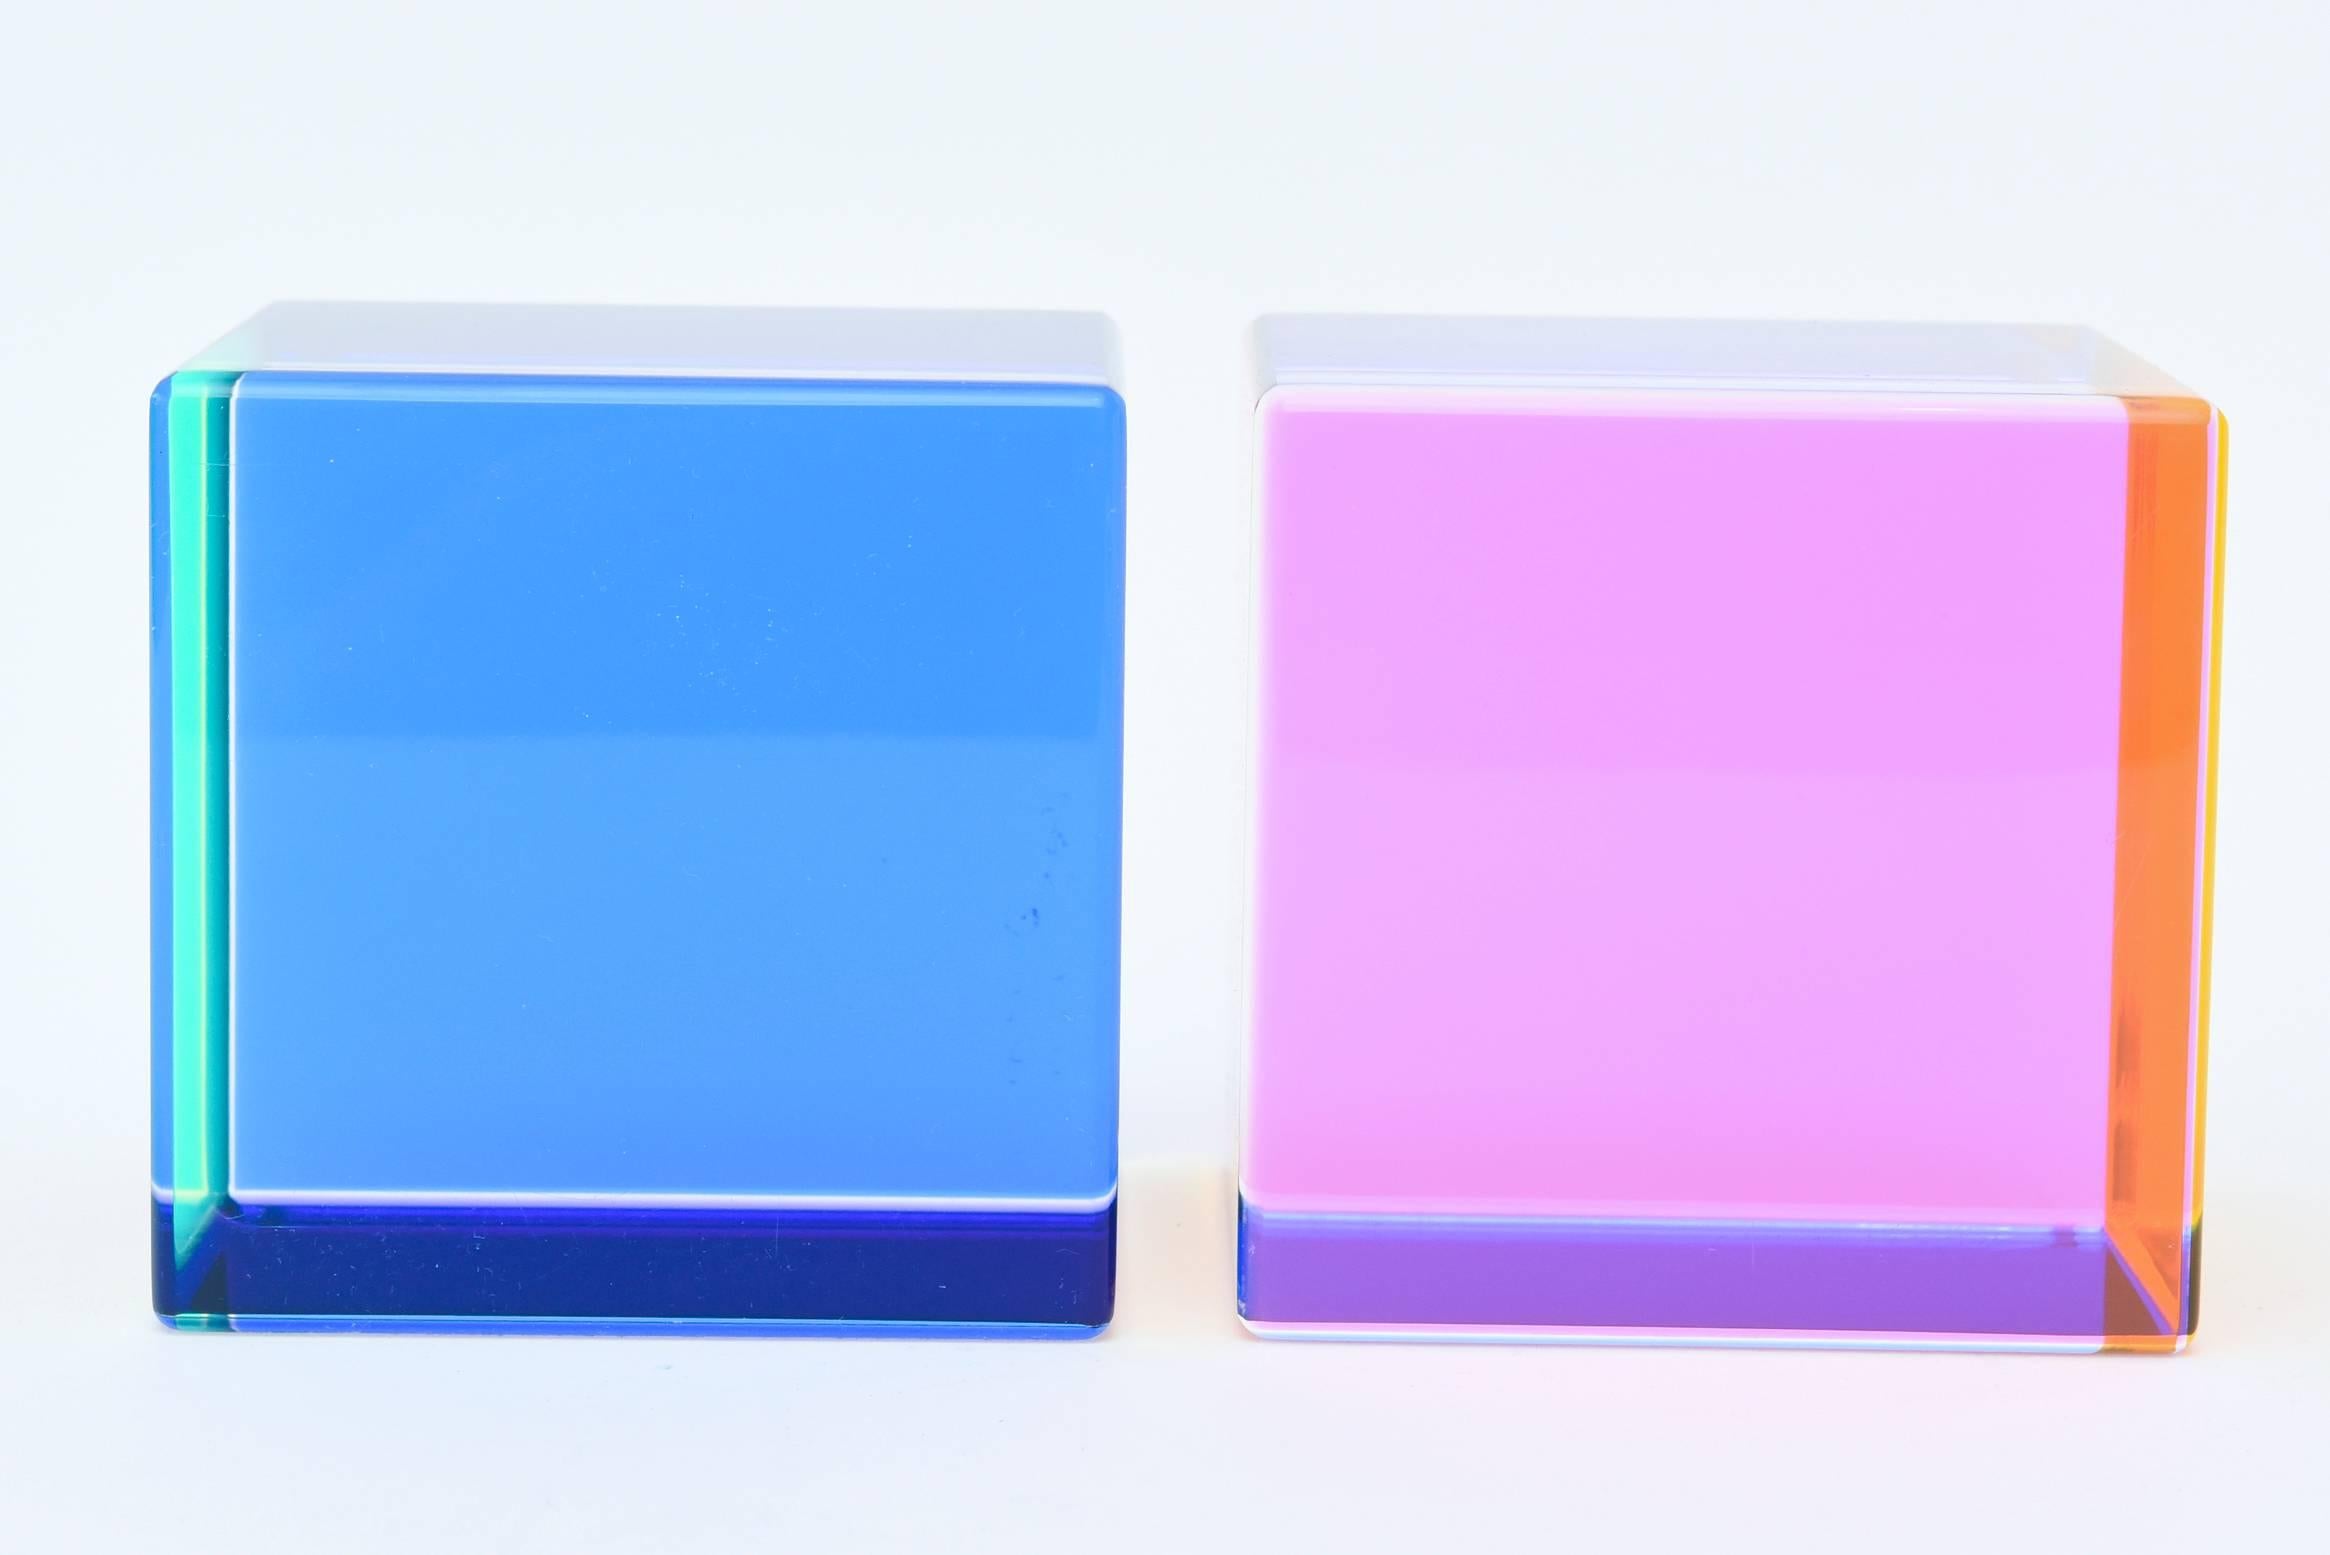 These fantastic and amazing colored laminated square Lucite large cube sculptures are signed by Vasa, 1993.
With each side and way you look at them and with the play of light entering in, they change color.
They are much more arresting in person